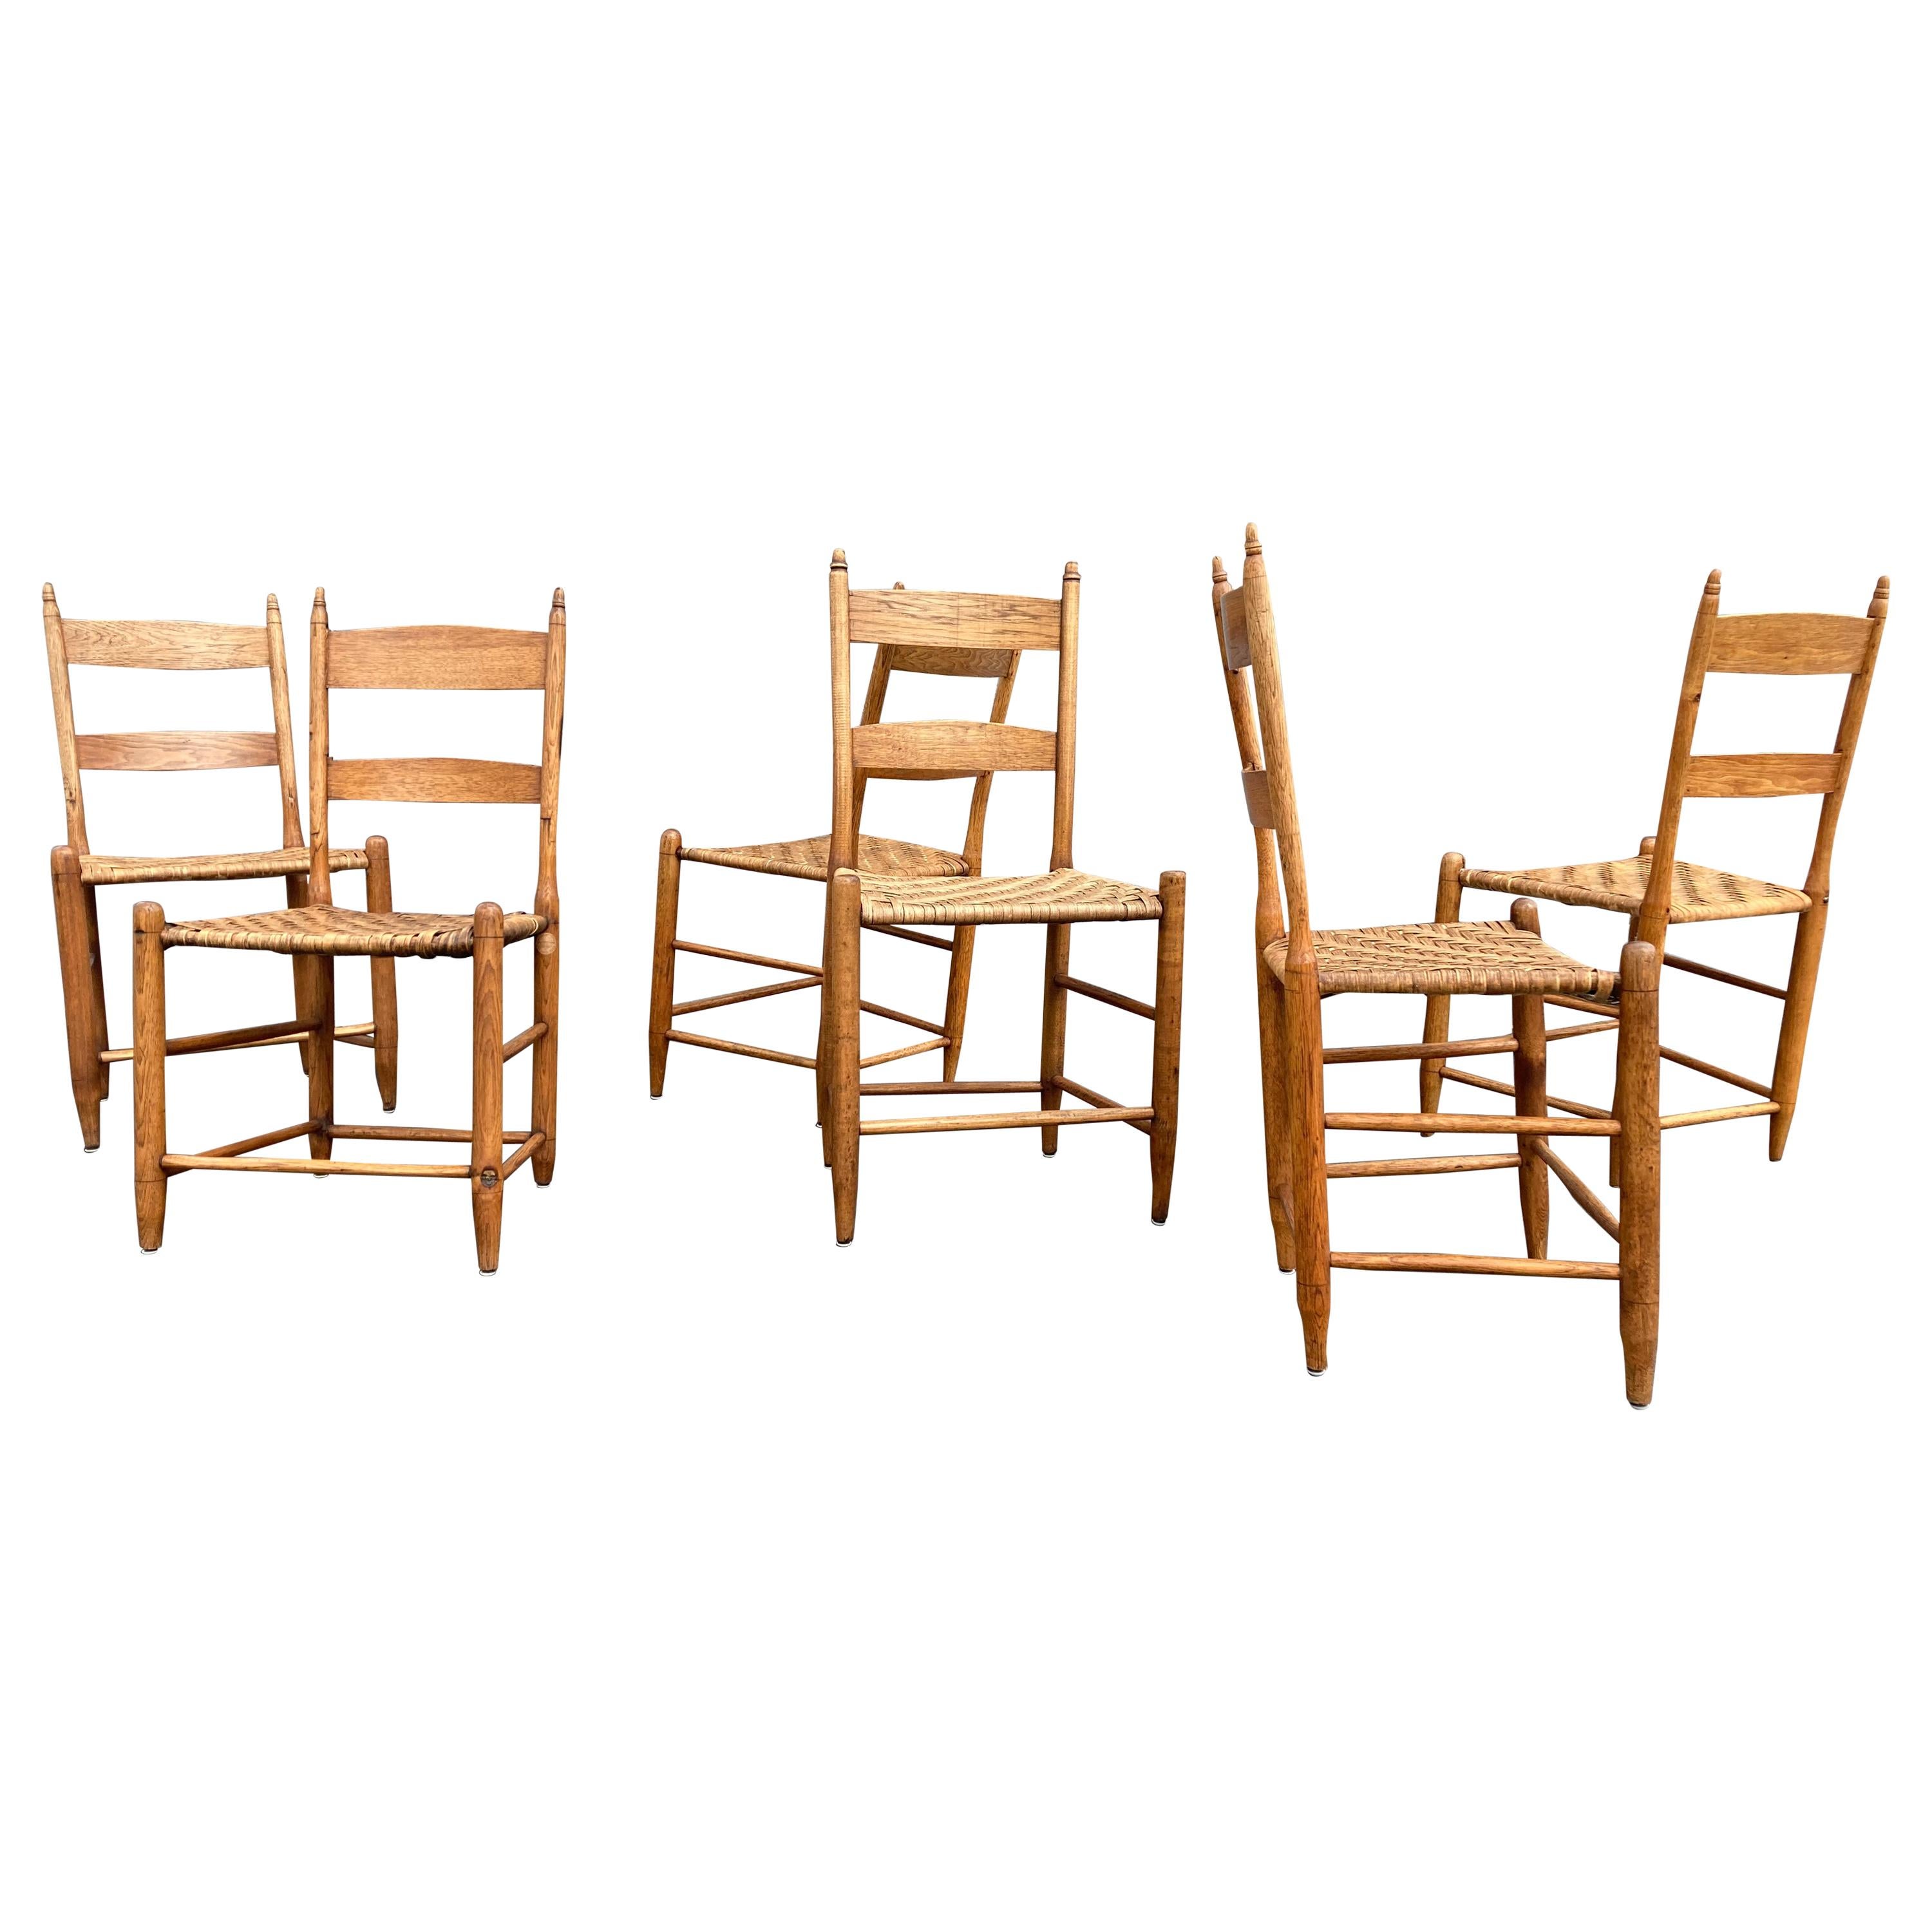 Set of Six Beautiful Antique Dining Chairs, Hickory, Virginia, 1880s For Sale